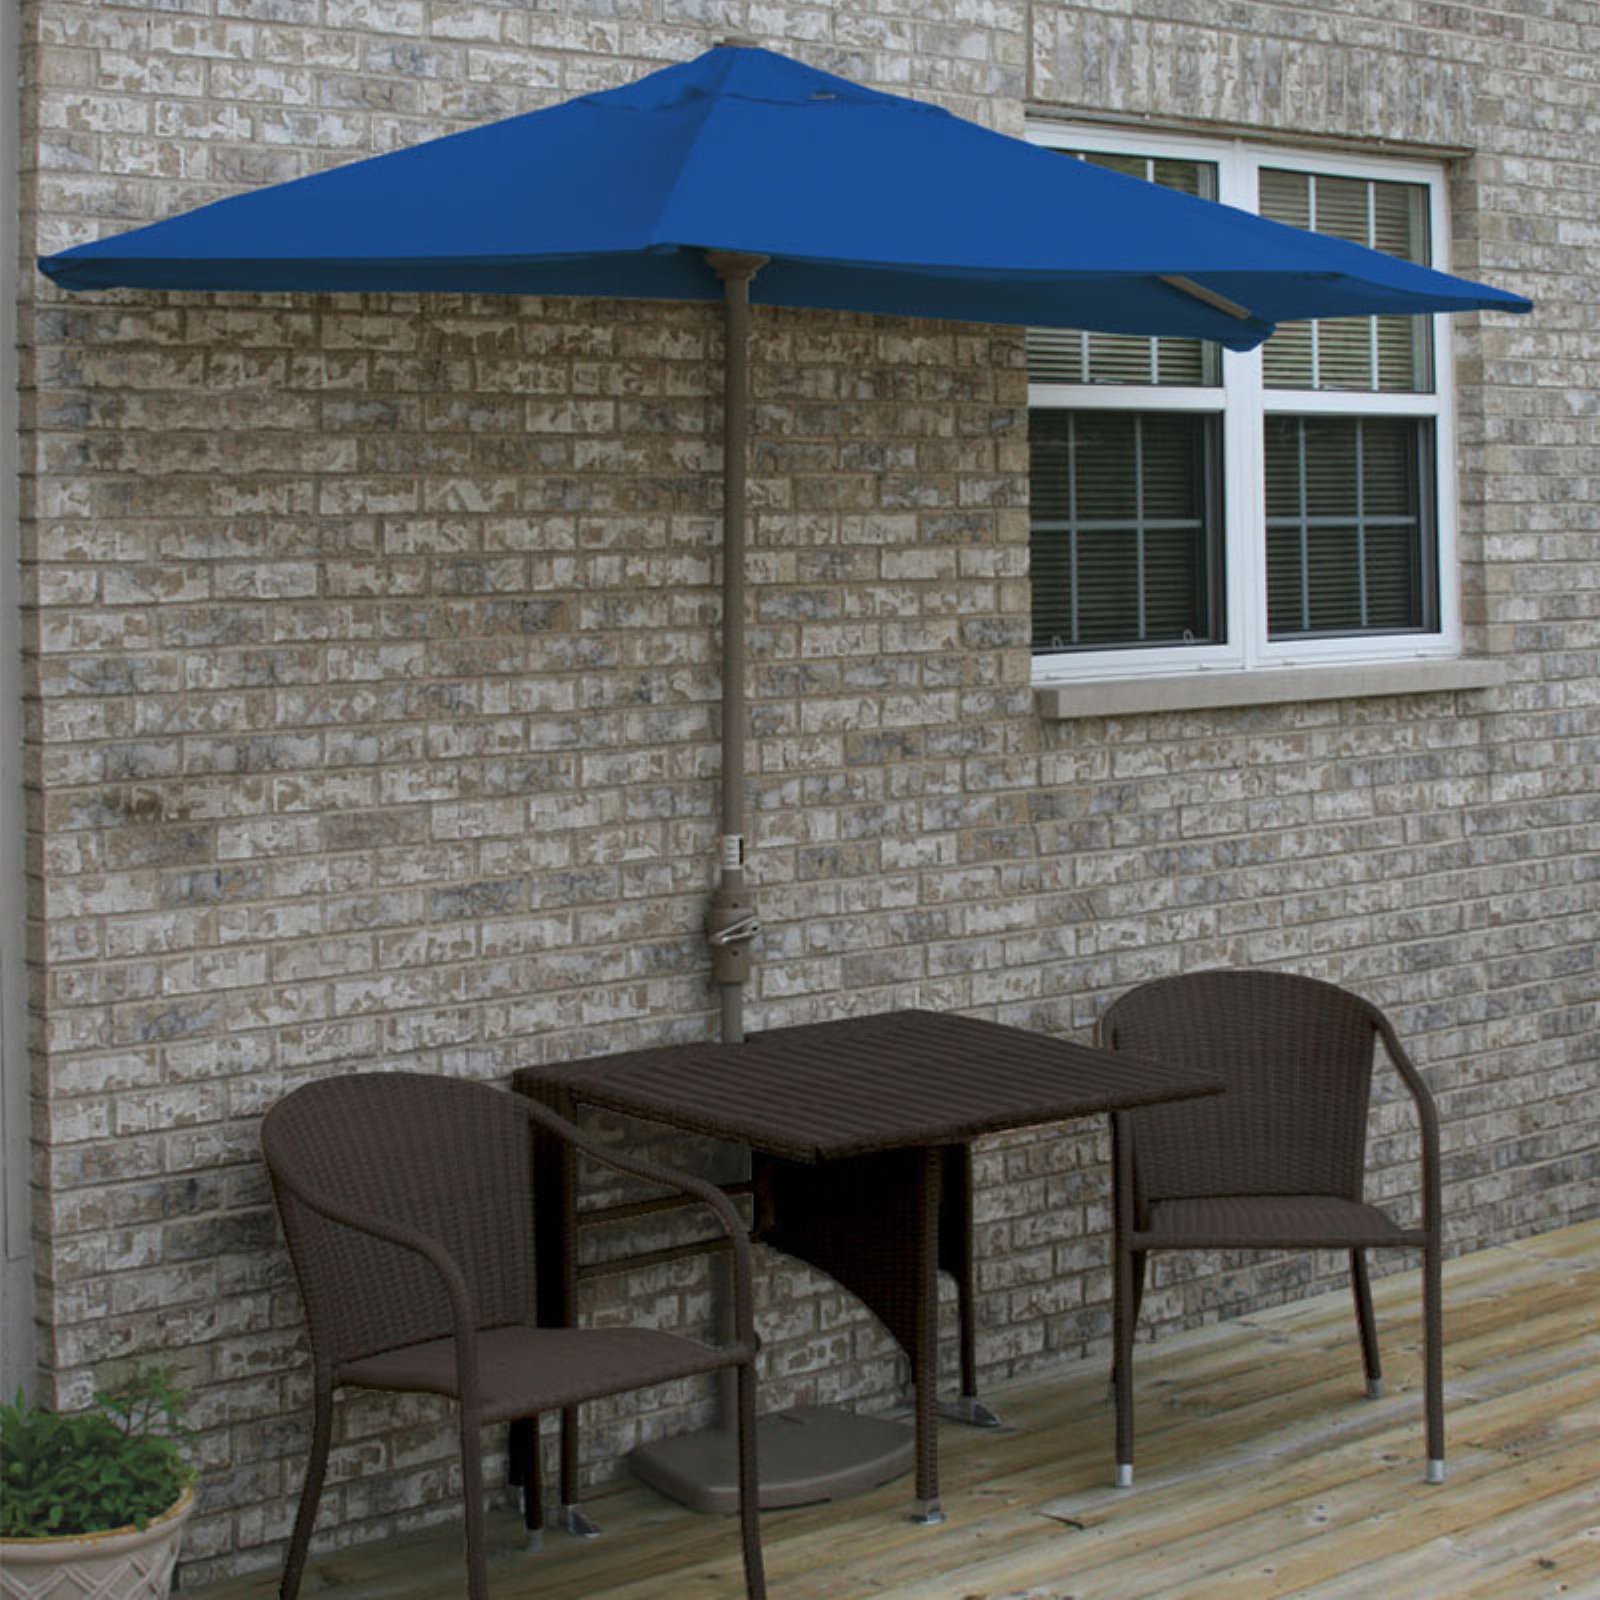 Blue Star Group Terrace Mates Daniella All-Weather Wicker Java Color Table Set w/ 9'-Wide OFF-THE-WALL BRELLA - Blue Olefin Canopy - image 2 of 9